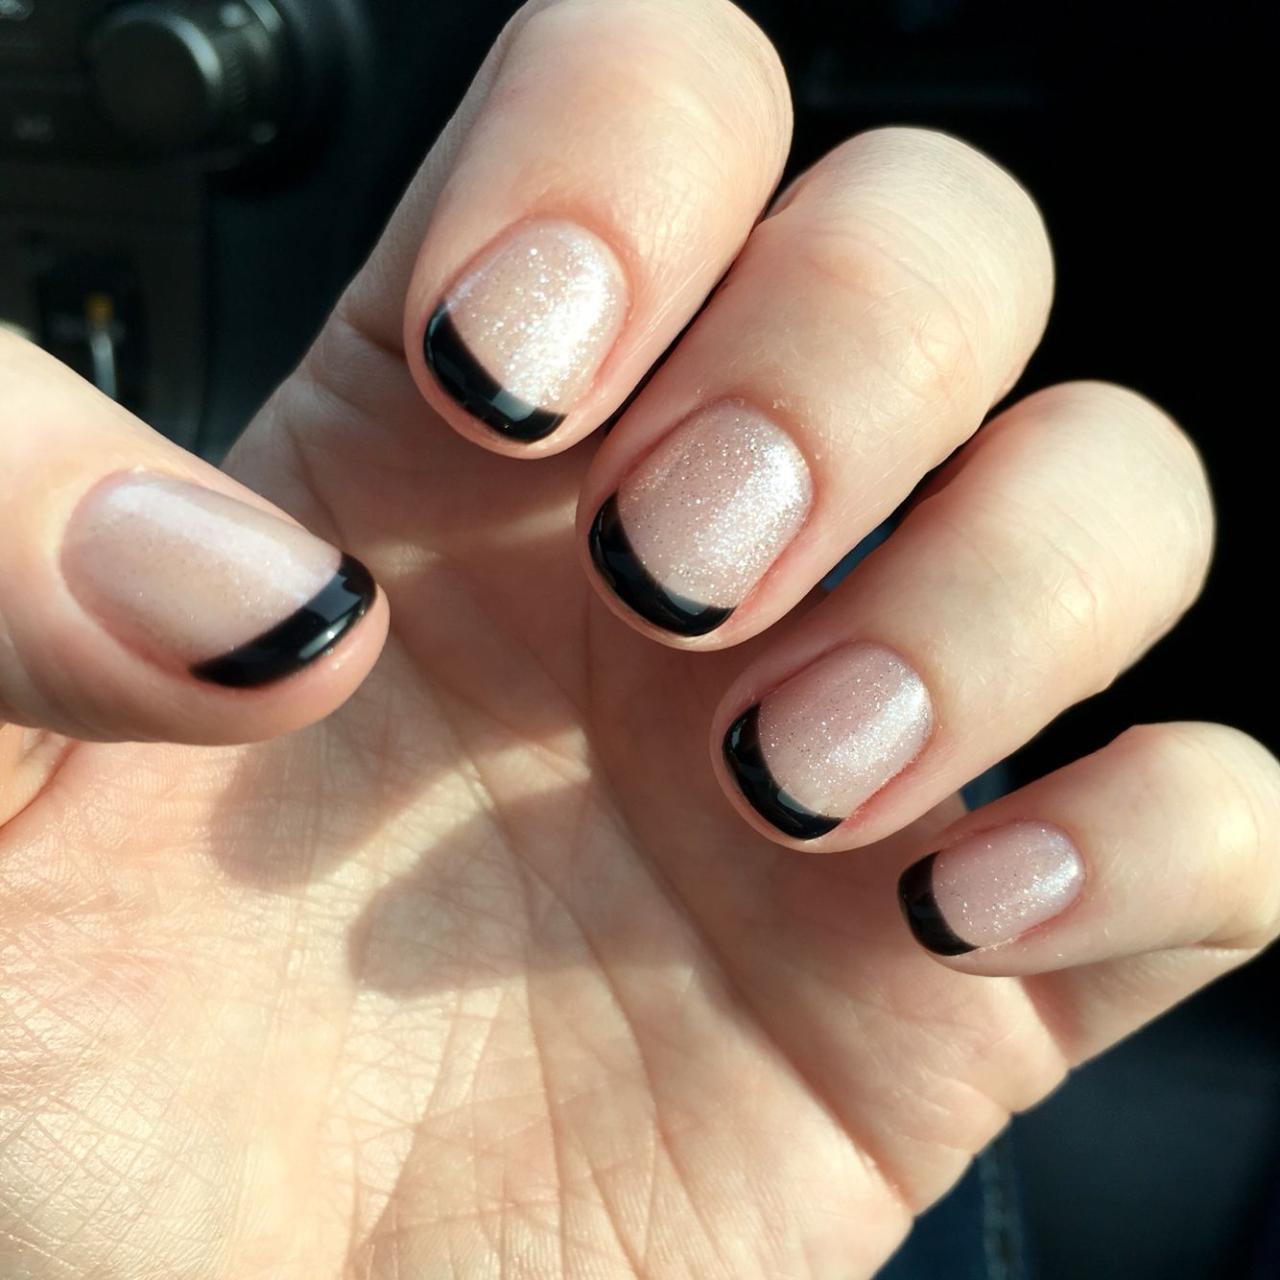 Black Tip French Manicure With Sparkles, On Short Nails. | Trendy Nail Art  Designs, Trendy Nail Art, Orange Nail Designs